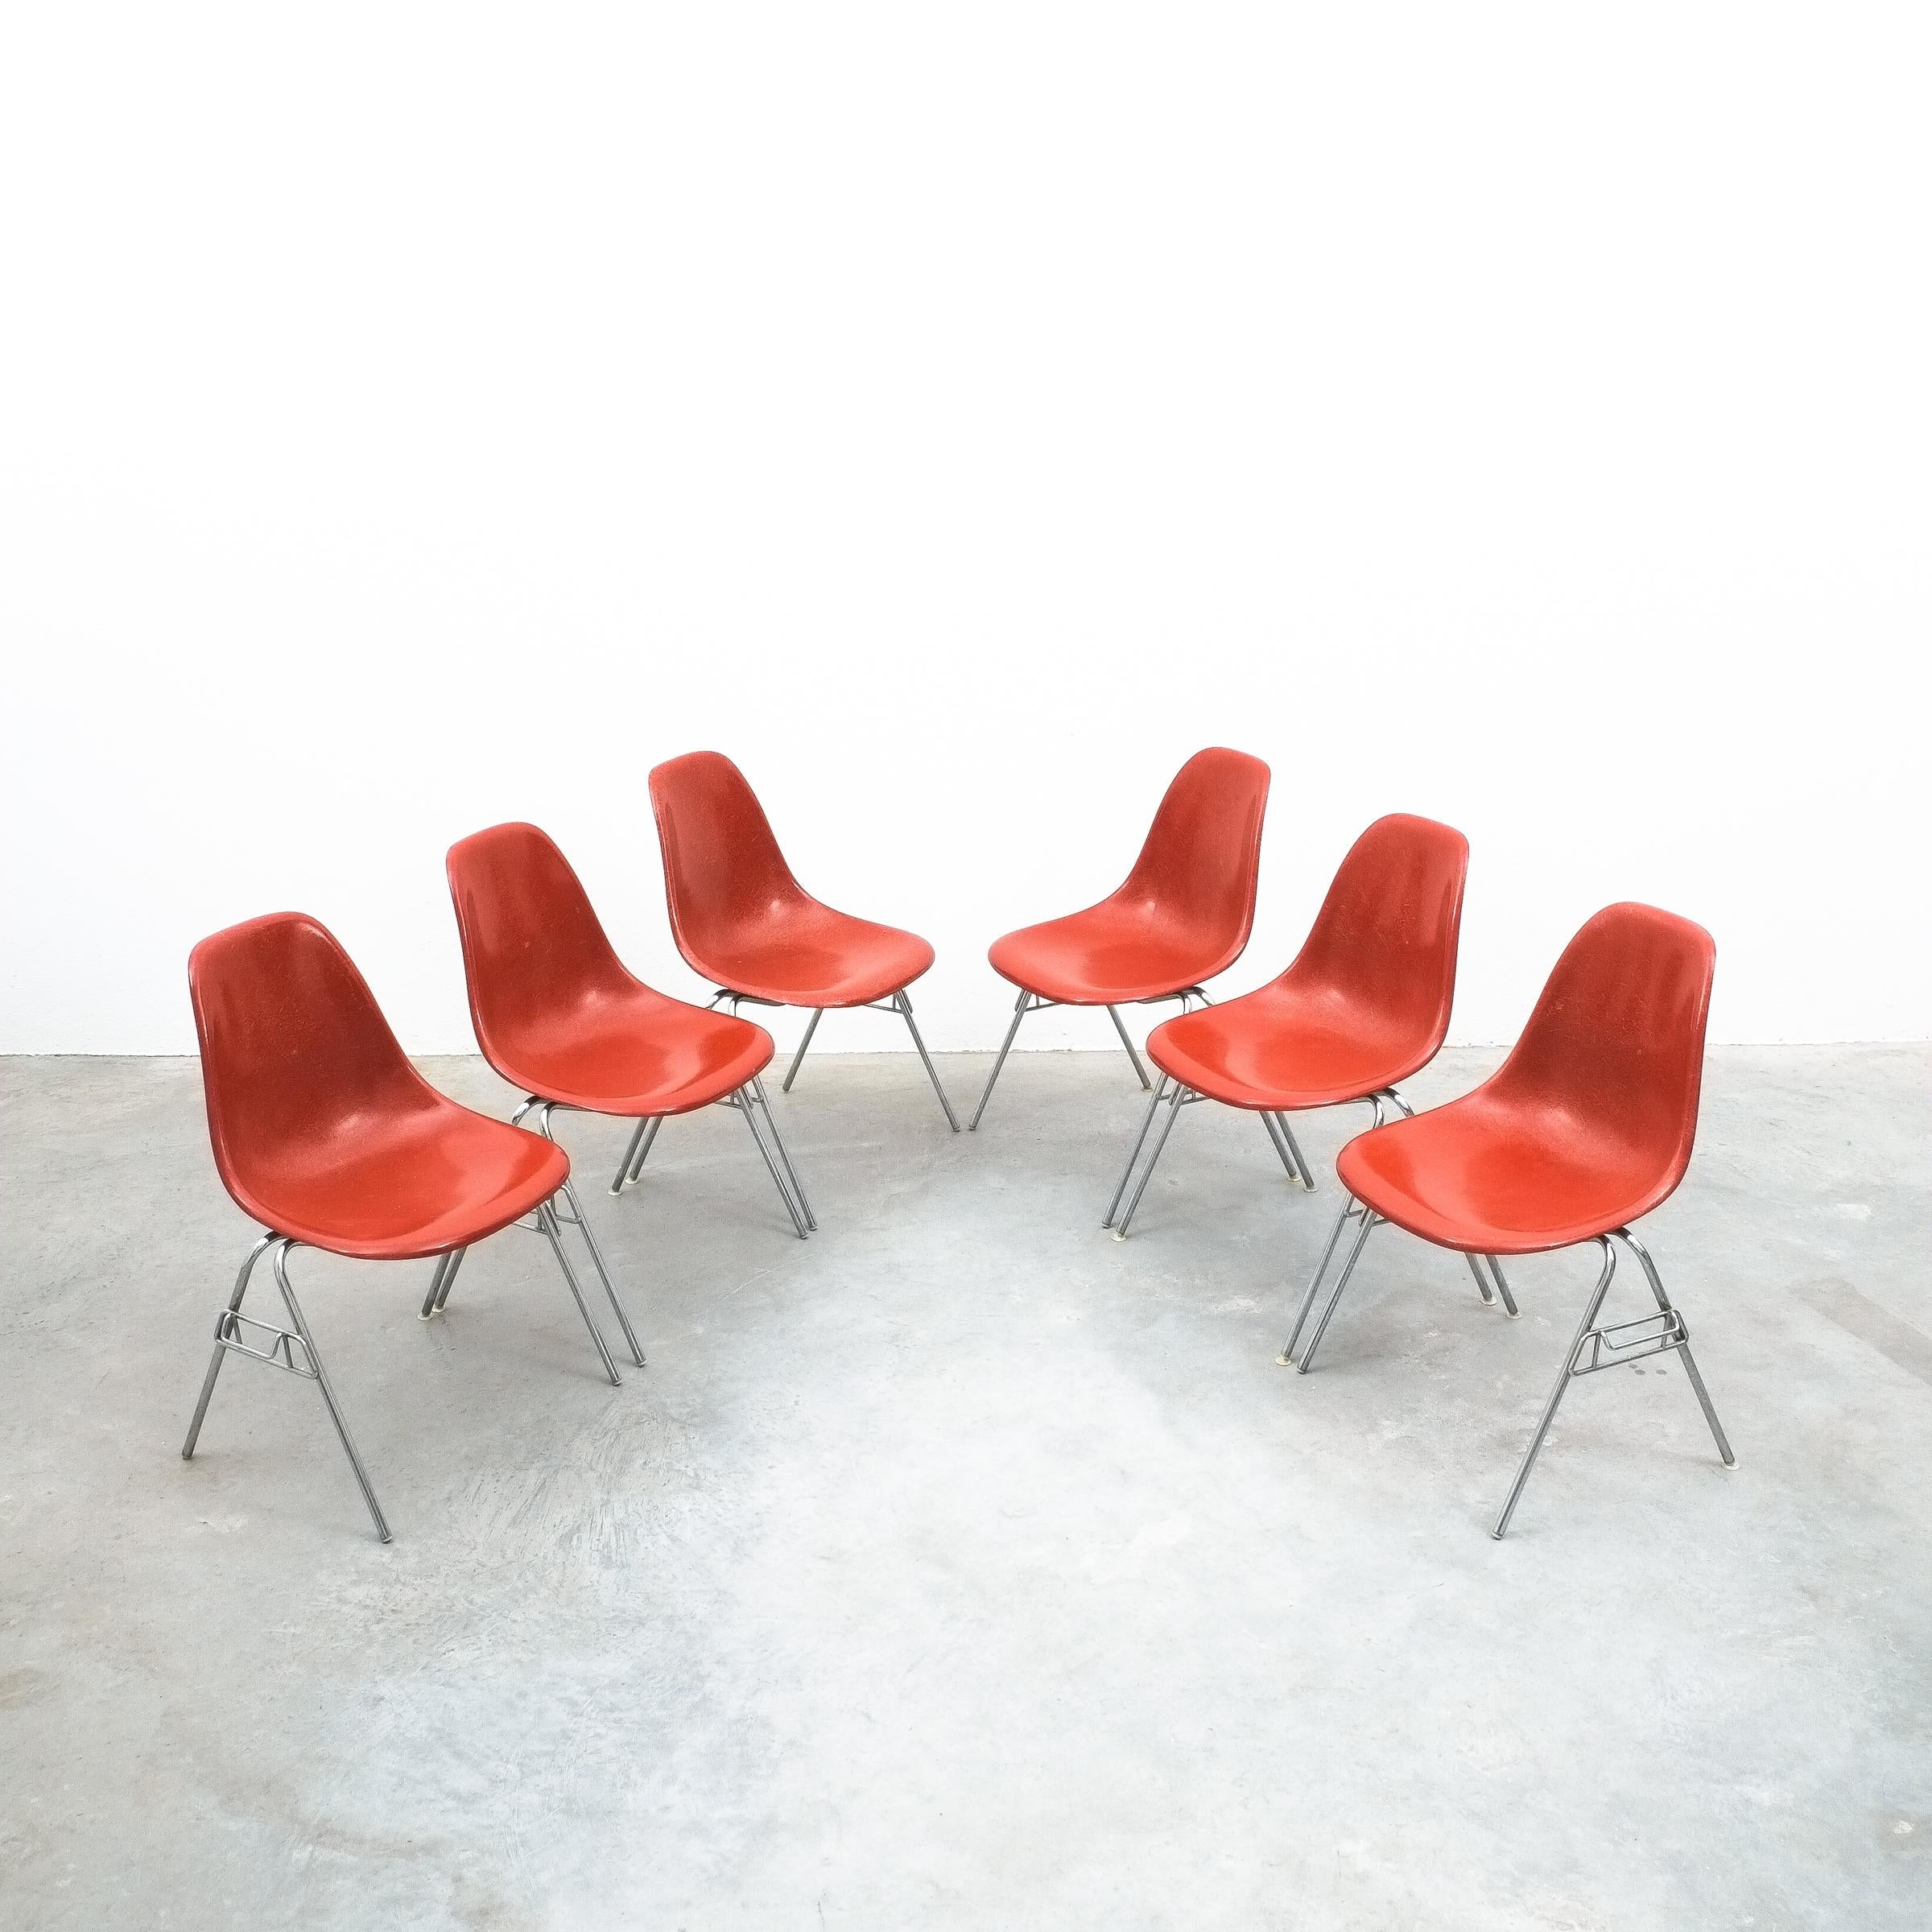 12 rare Herman Miller Eames dining chairs terracotta, circa 1970

we have 2 sets a 6 pieces available.

They were produced in the years 1970-1978. DSR plastic side chair. The scarce terracotta (TC) colored shell has its original finish with